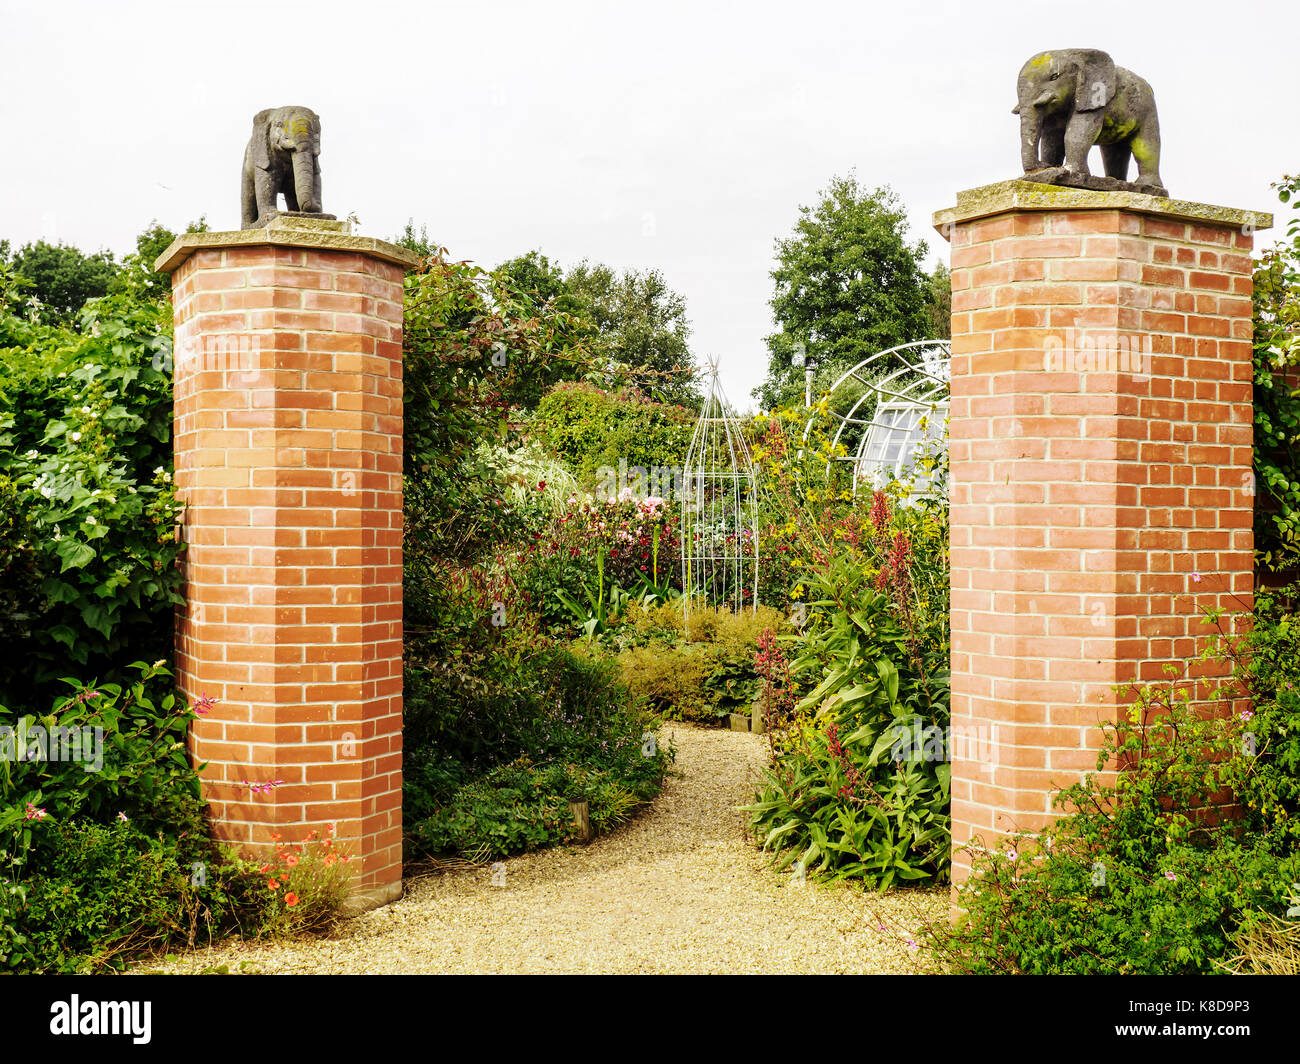 The Old Vicarage Garden in East Ruston, Norfolk, UK are a well known tourist attraction and were created by Alan Gray and his partner Stock Photo